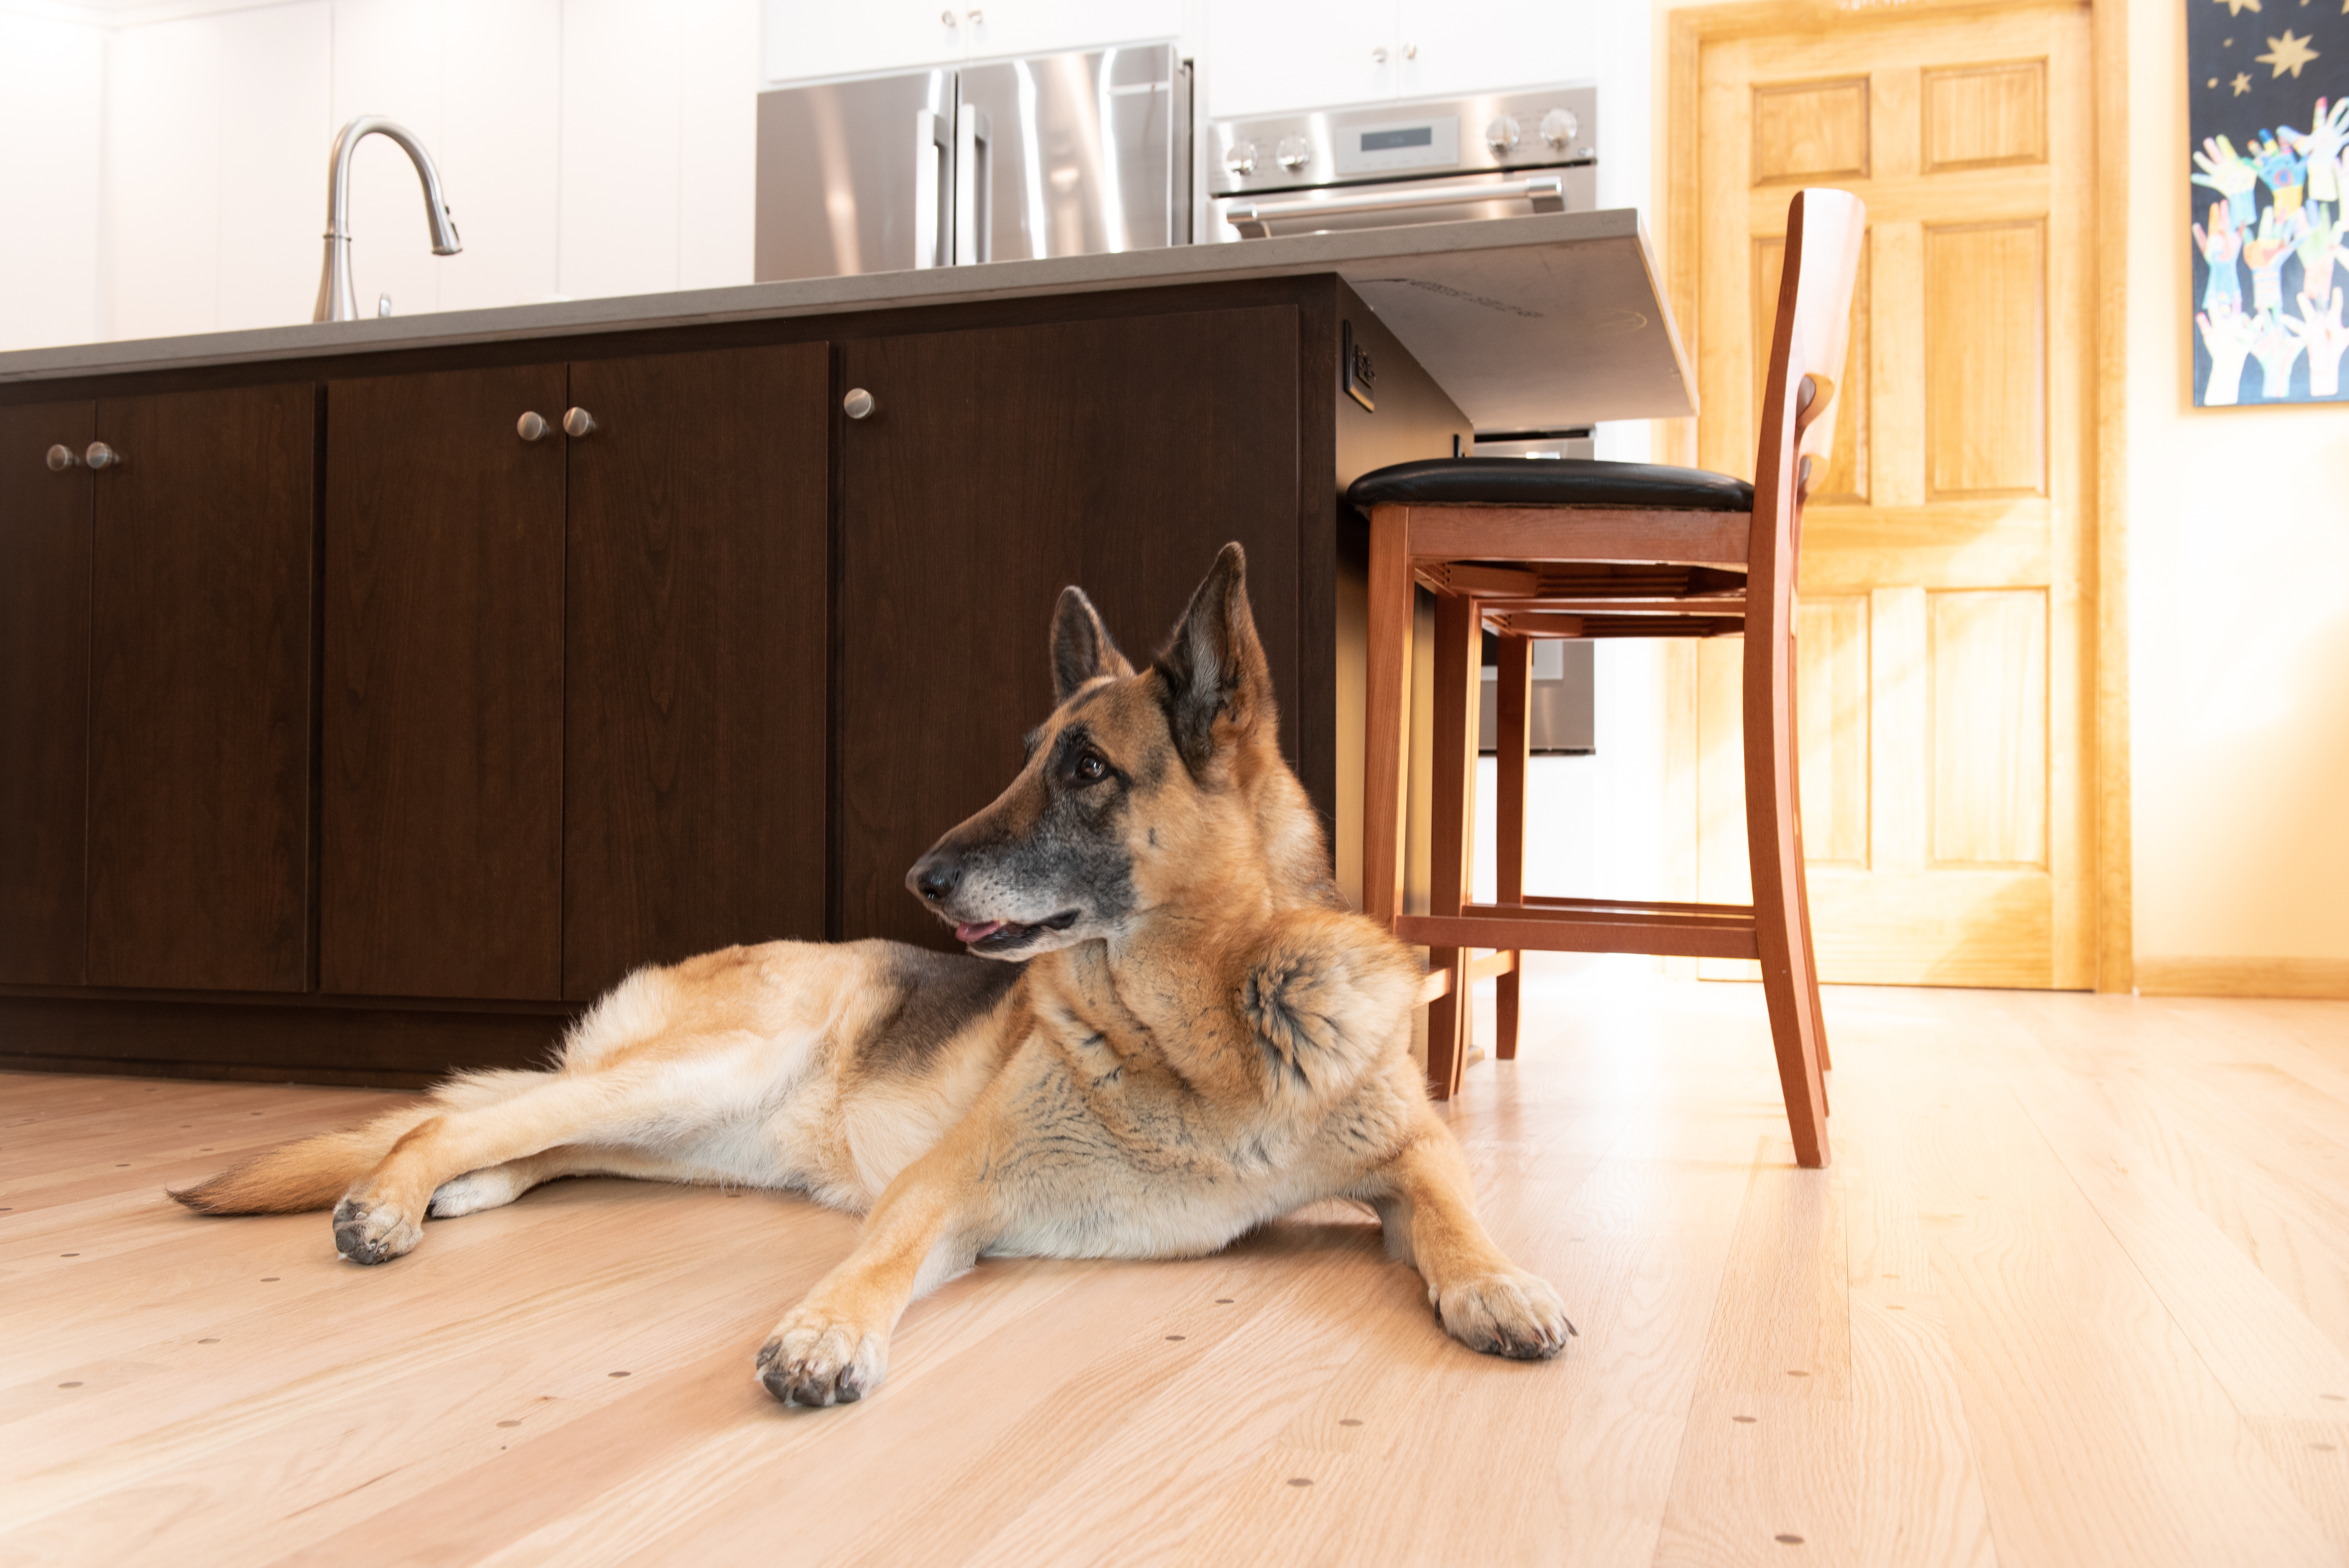 Designing a Pet-Friendly Home: Making Life Easier for You and Your Furry Friends